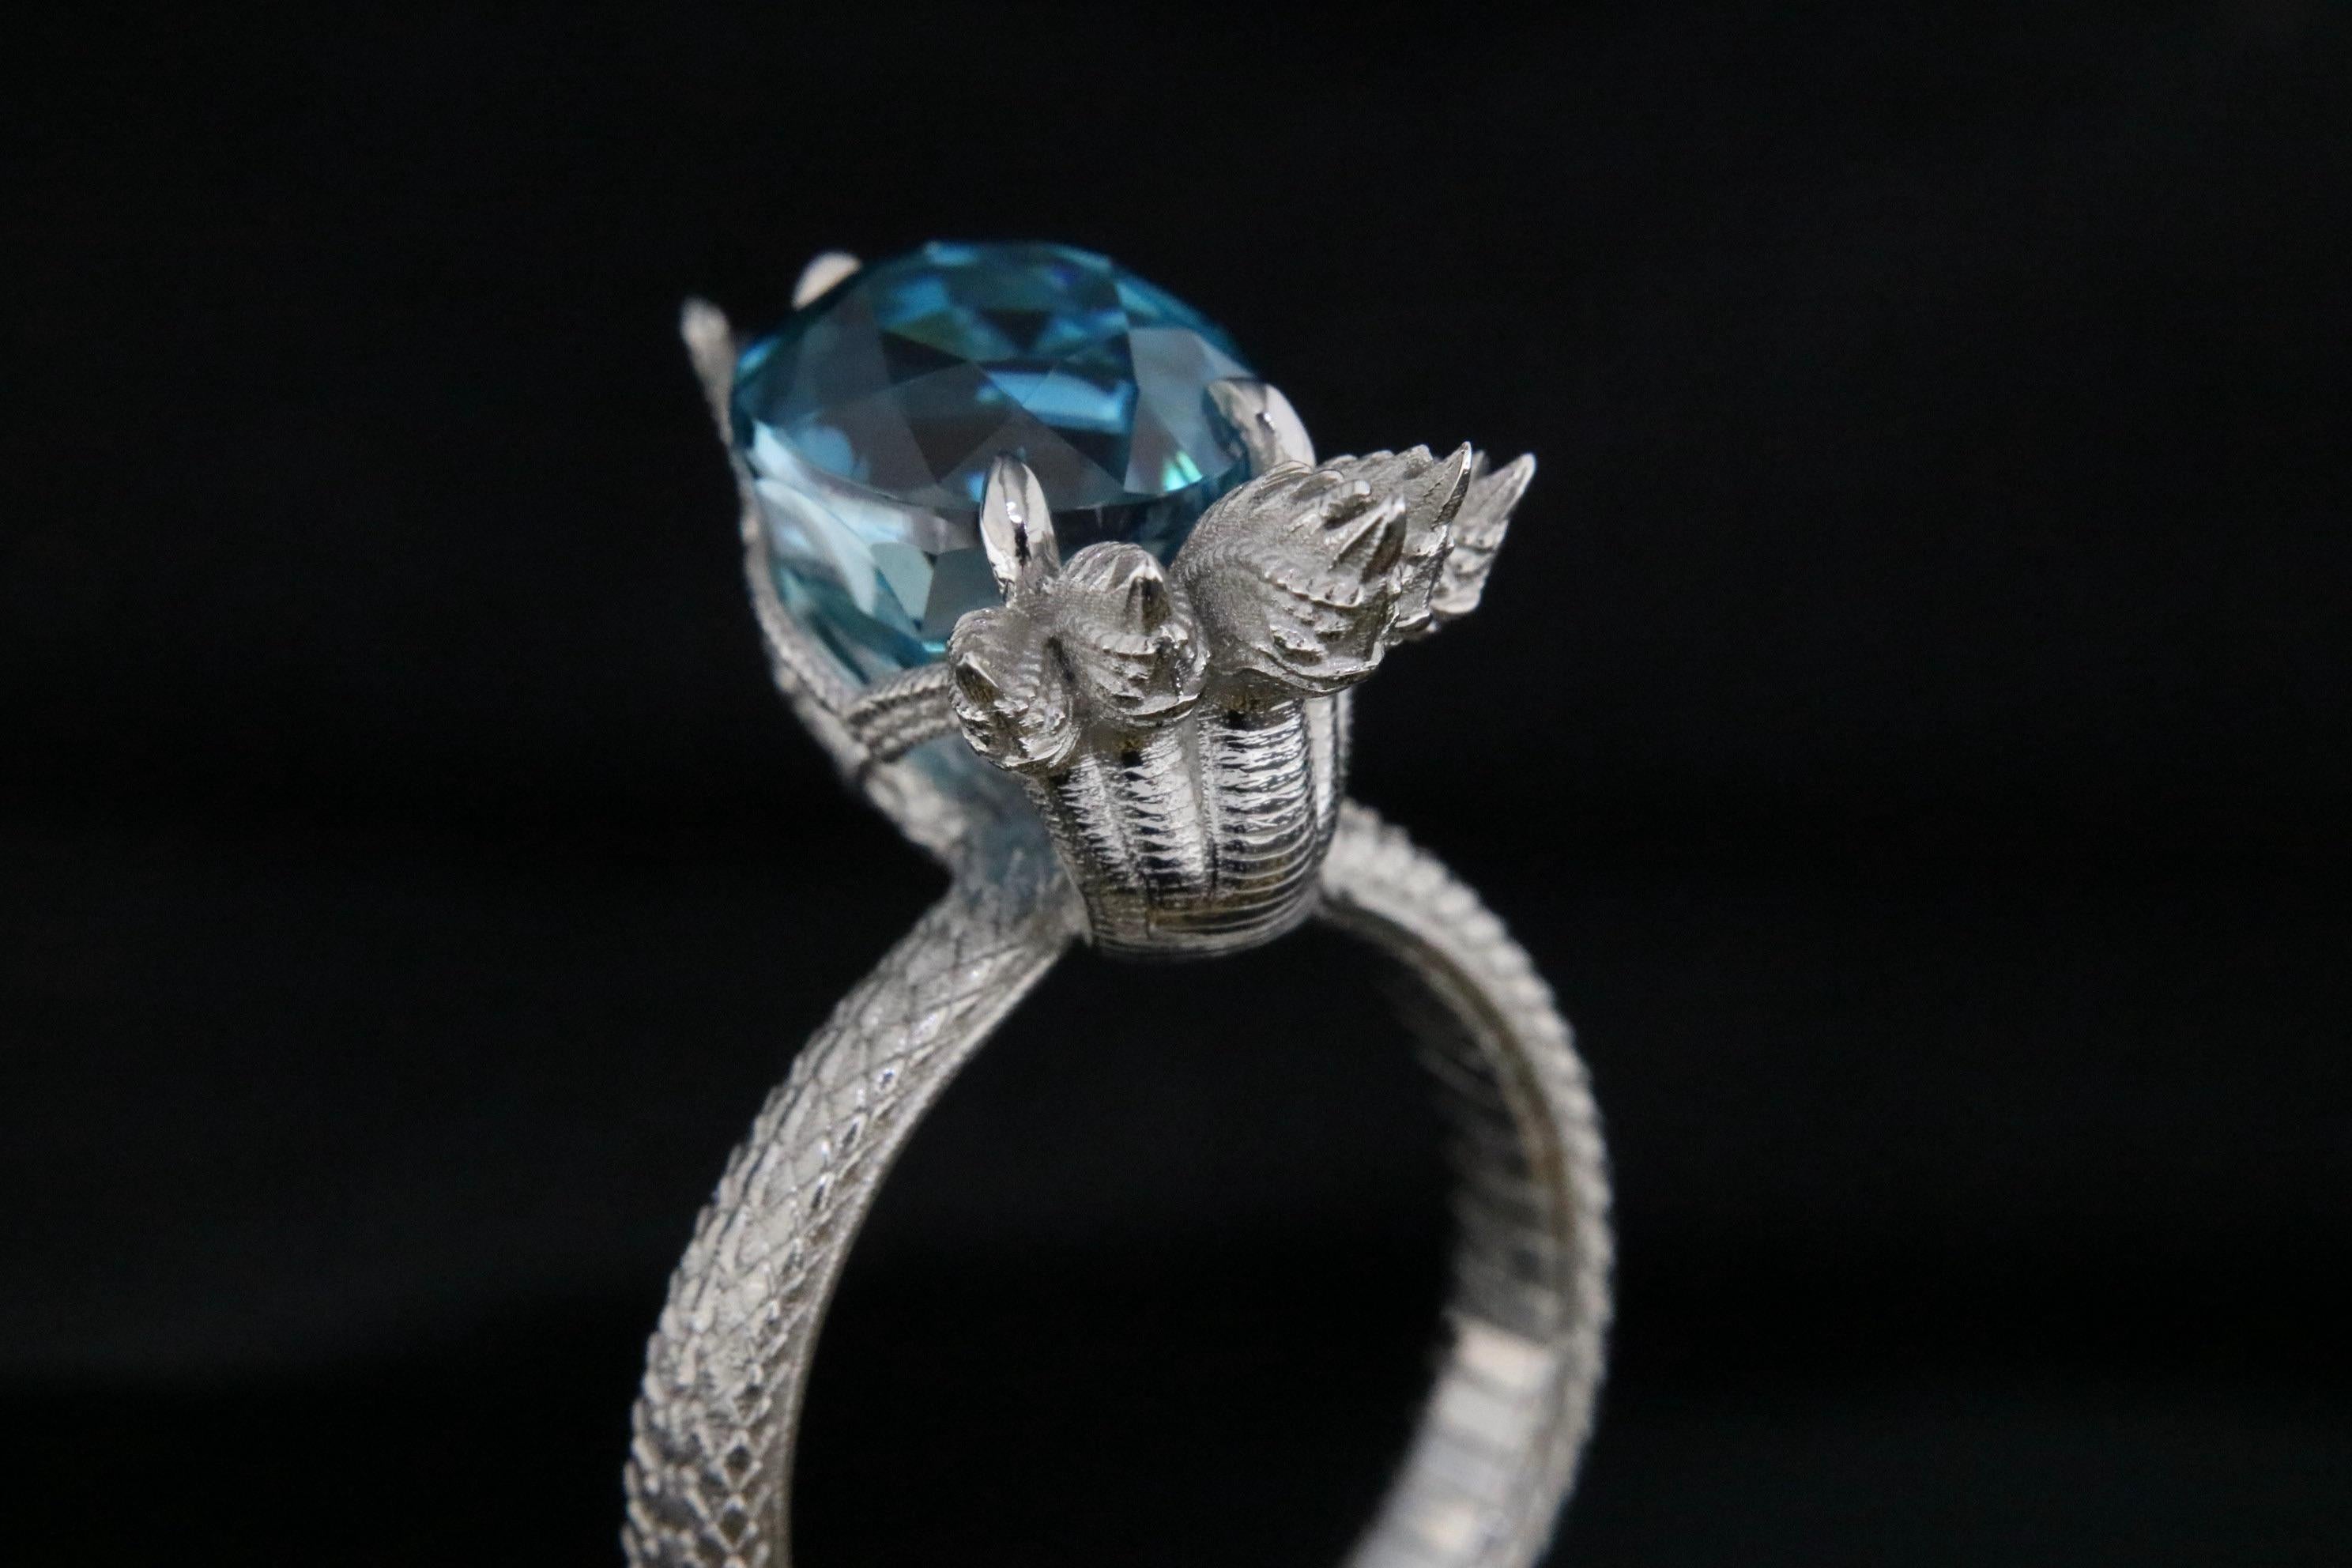 Orloff of Denmark: Auspicious Five-Headed Naga, 6.41 carat Blue Zircon Sculpture Ring.
The Naga, meaning 'a deity in the form of a serpent' in ancient Sanskrit, is a commonly found symbol throughout Asia. They are said to be benevolent spirits that